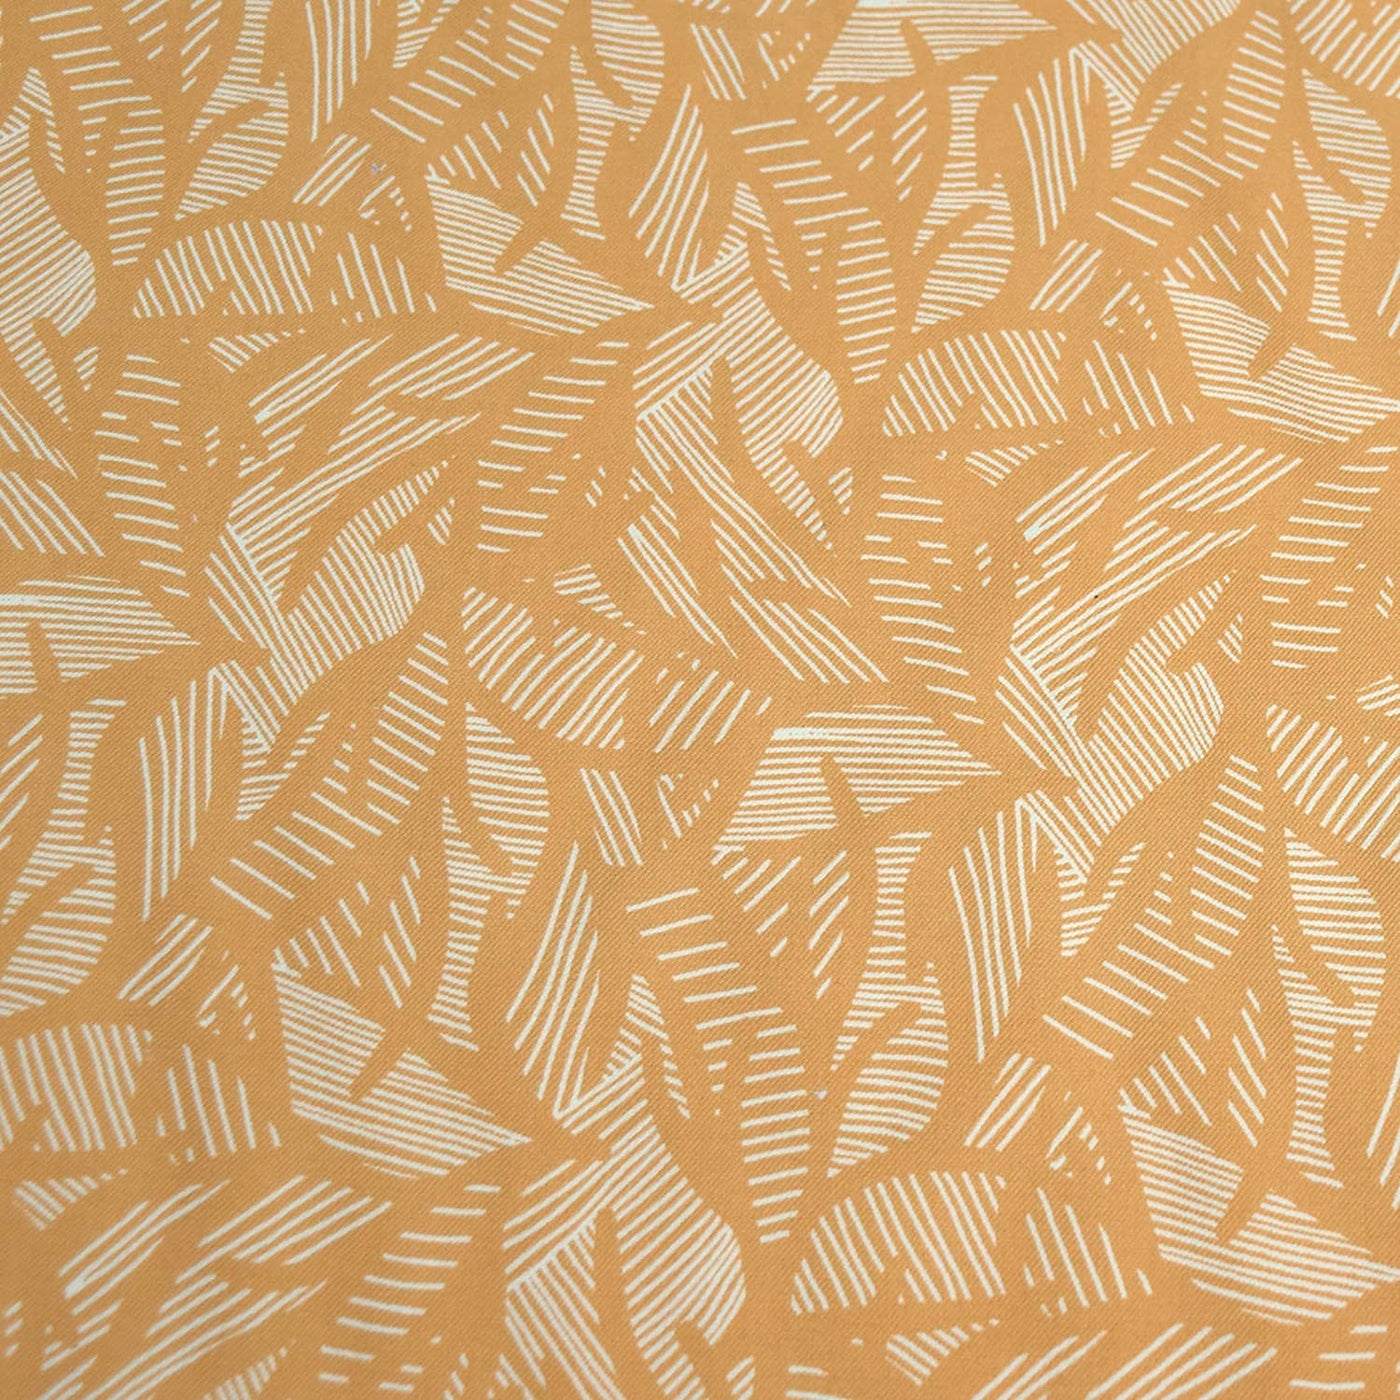 Summer Shade Honey Yellow Ombre Fern Foliage Viscose Twill Fabric By Cousette.